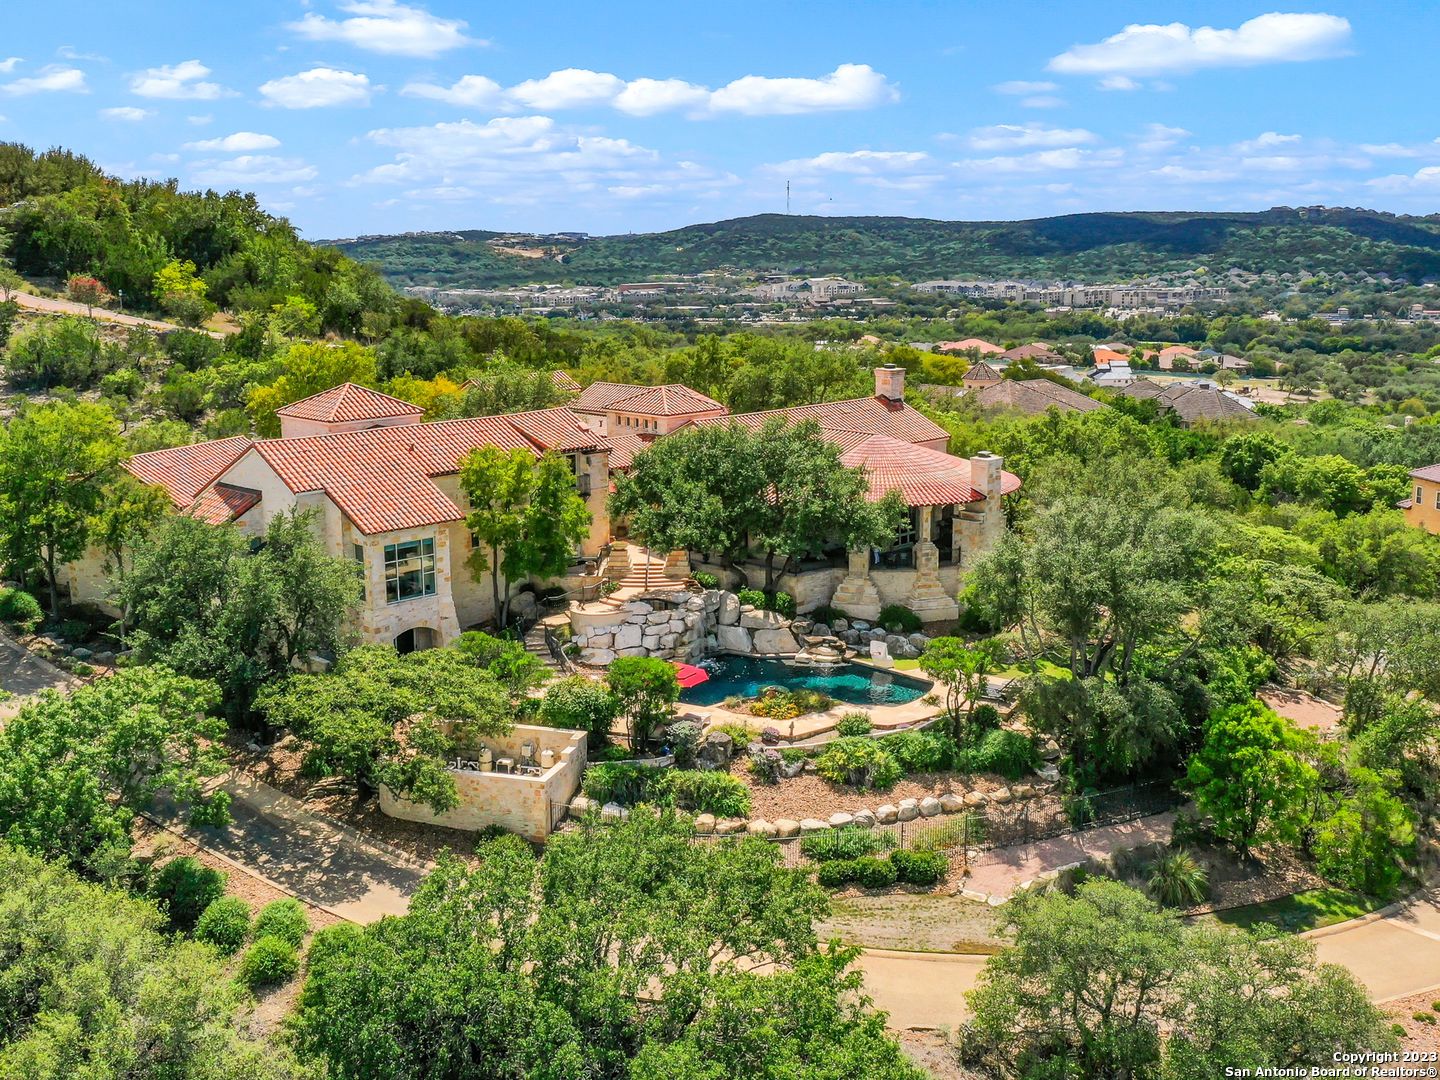 Unparalleled craftsmanship! Located on a 2.35+- acre hillside lot this perfectly situated home relishes the awe inspiring 180+ degree Texas Hill Country views from every room! This architecturally significant Dominion home is one-of-a-kind, and was designed by renowned architect, Roy Braswell, and built by master builder, Image Custom Homes. The finest appointments throughout are fit for the most discerning buyer. Grandeur open living space is appointed with vaulted ceiling, floor to ceiling stone fireplace and opens to dining room with doors opening to expansive covered patio. Entertainers dream kitchen with Sub Zero appliances, custom cabinetry, and large center island with breakfast bar, is adjoined by wet bar and separate caterers' kitchen with extensive storage and secondary dishwasher. Primary suite offers outdoor access with its own covered patio and generous ensuite bath boasting natural stone elements, multiple vanities, built-ins, two closets, and soaking tub overlooking serene private yard. 3 secondary bedrooms are on the first floor, each with their own ensuite bath and breathtaking views. Spiral staircase leads down to entertainment level with game room, bar, full bath, and pool access. Impressive deep-water Keith Zars pool offers spa, multiple water features, diving ledge, and pristine flagstone decking providing ample poolside living space. Private drive, motor court, and three car garage provide ample room for all your toys.